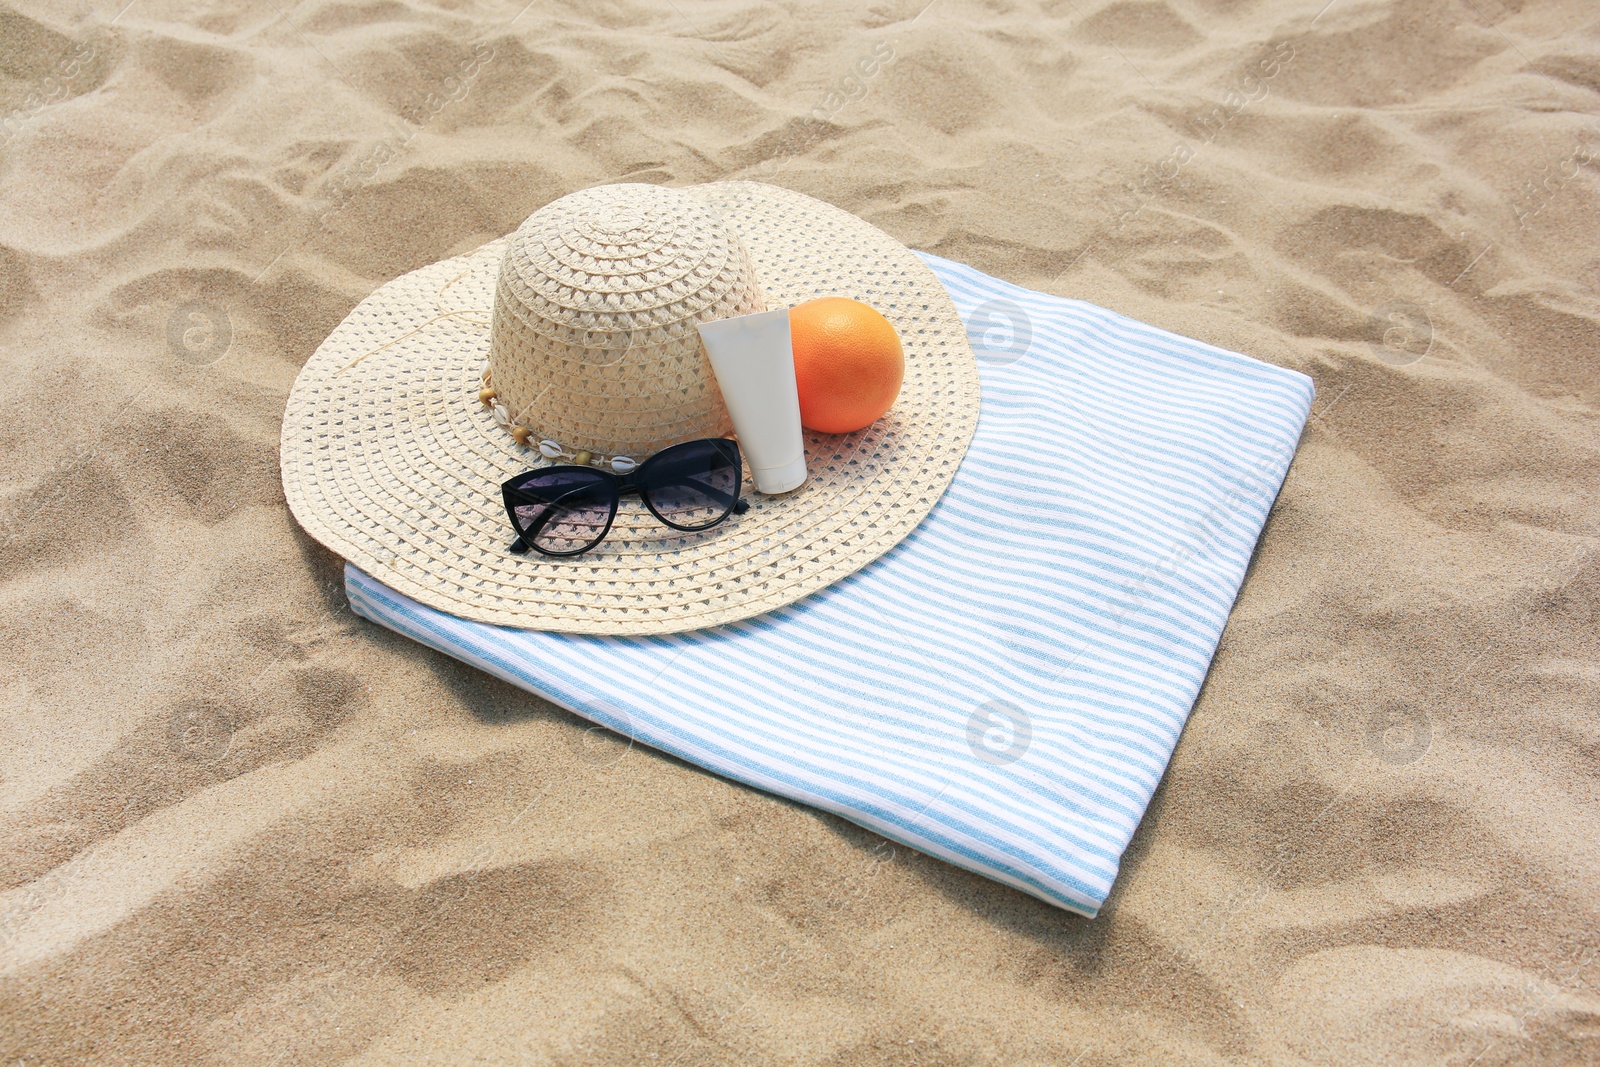 Photo of Beach accessories and orange on sand, above view